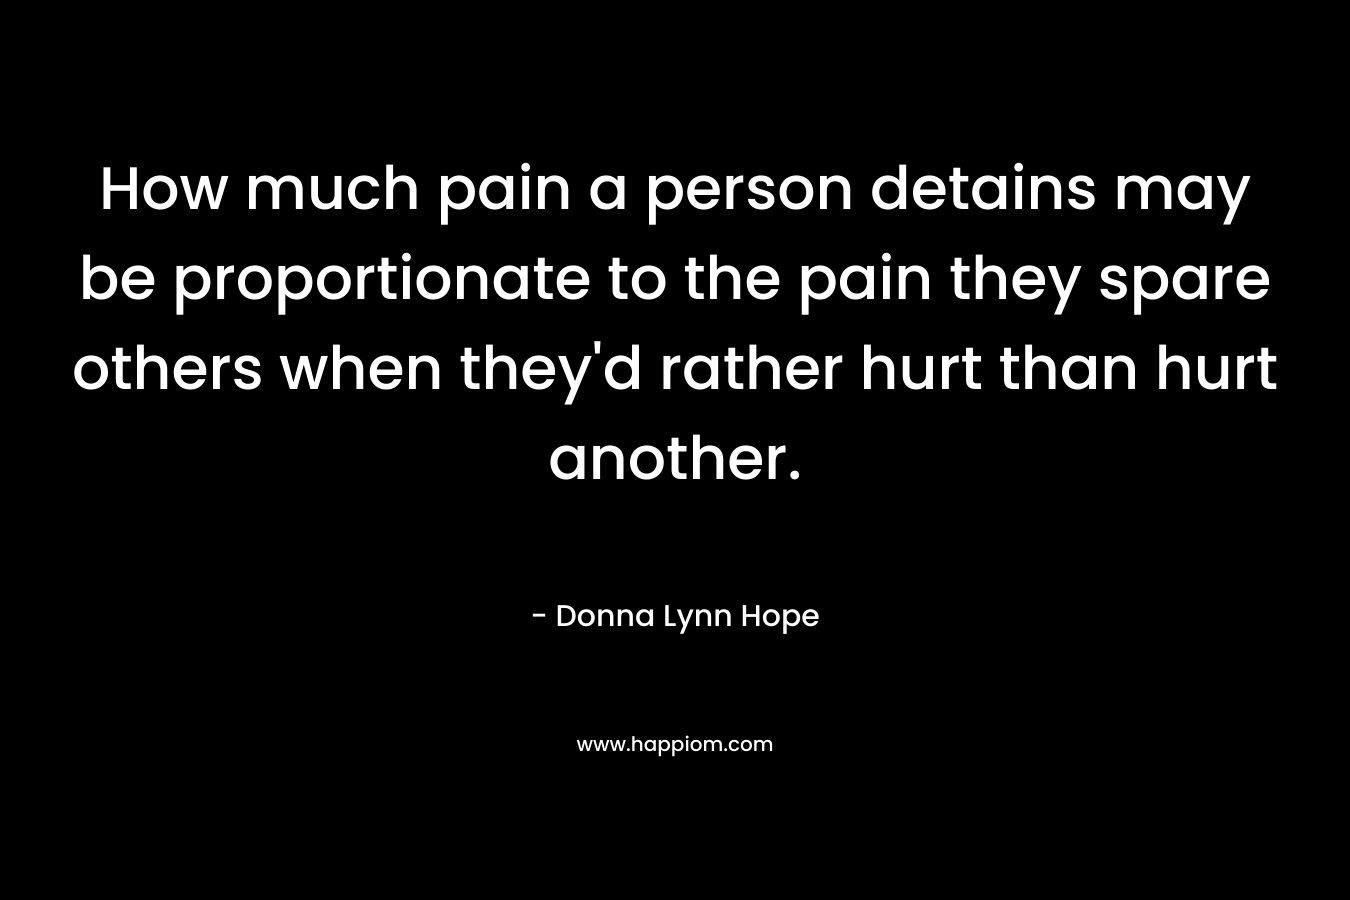 How much pain a person detains may be proportionate to the pain they spare others when they'd rather hurt than hurt another.